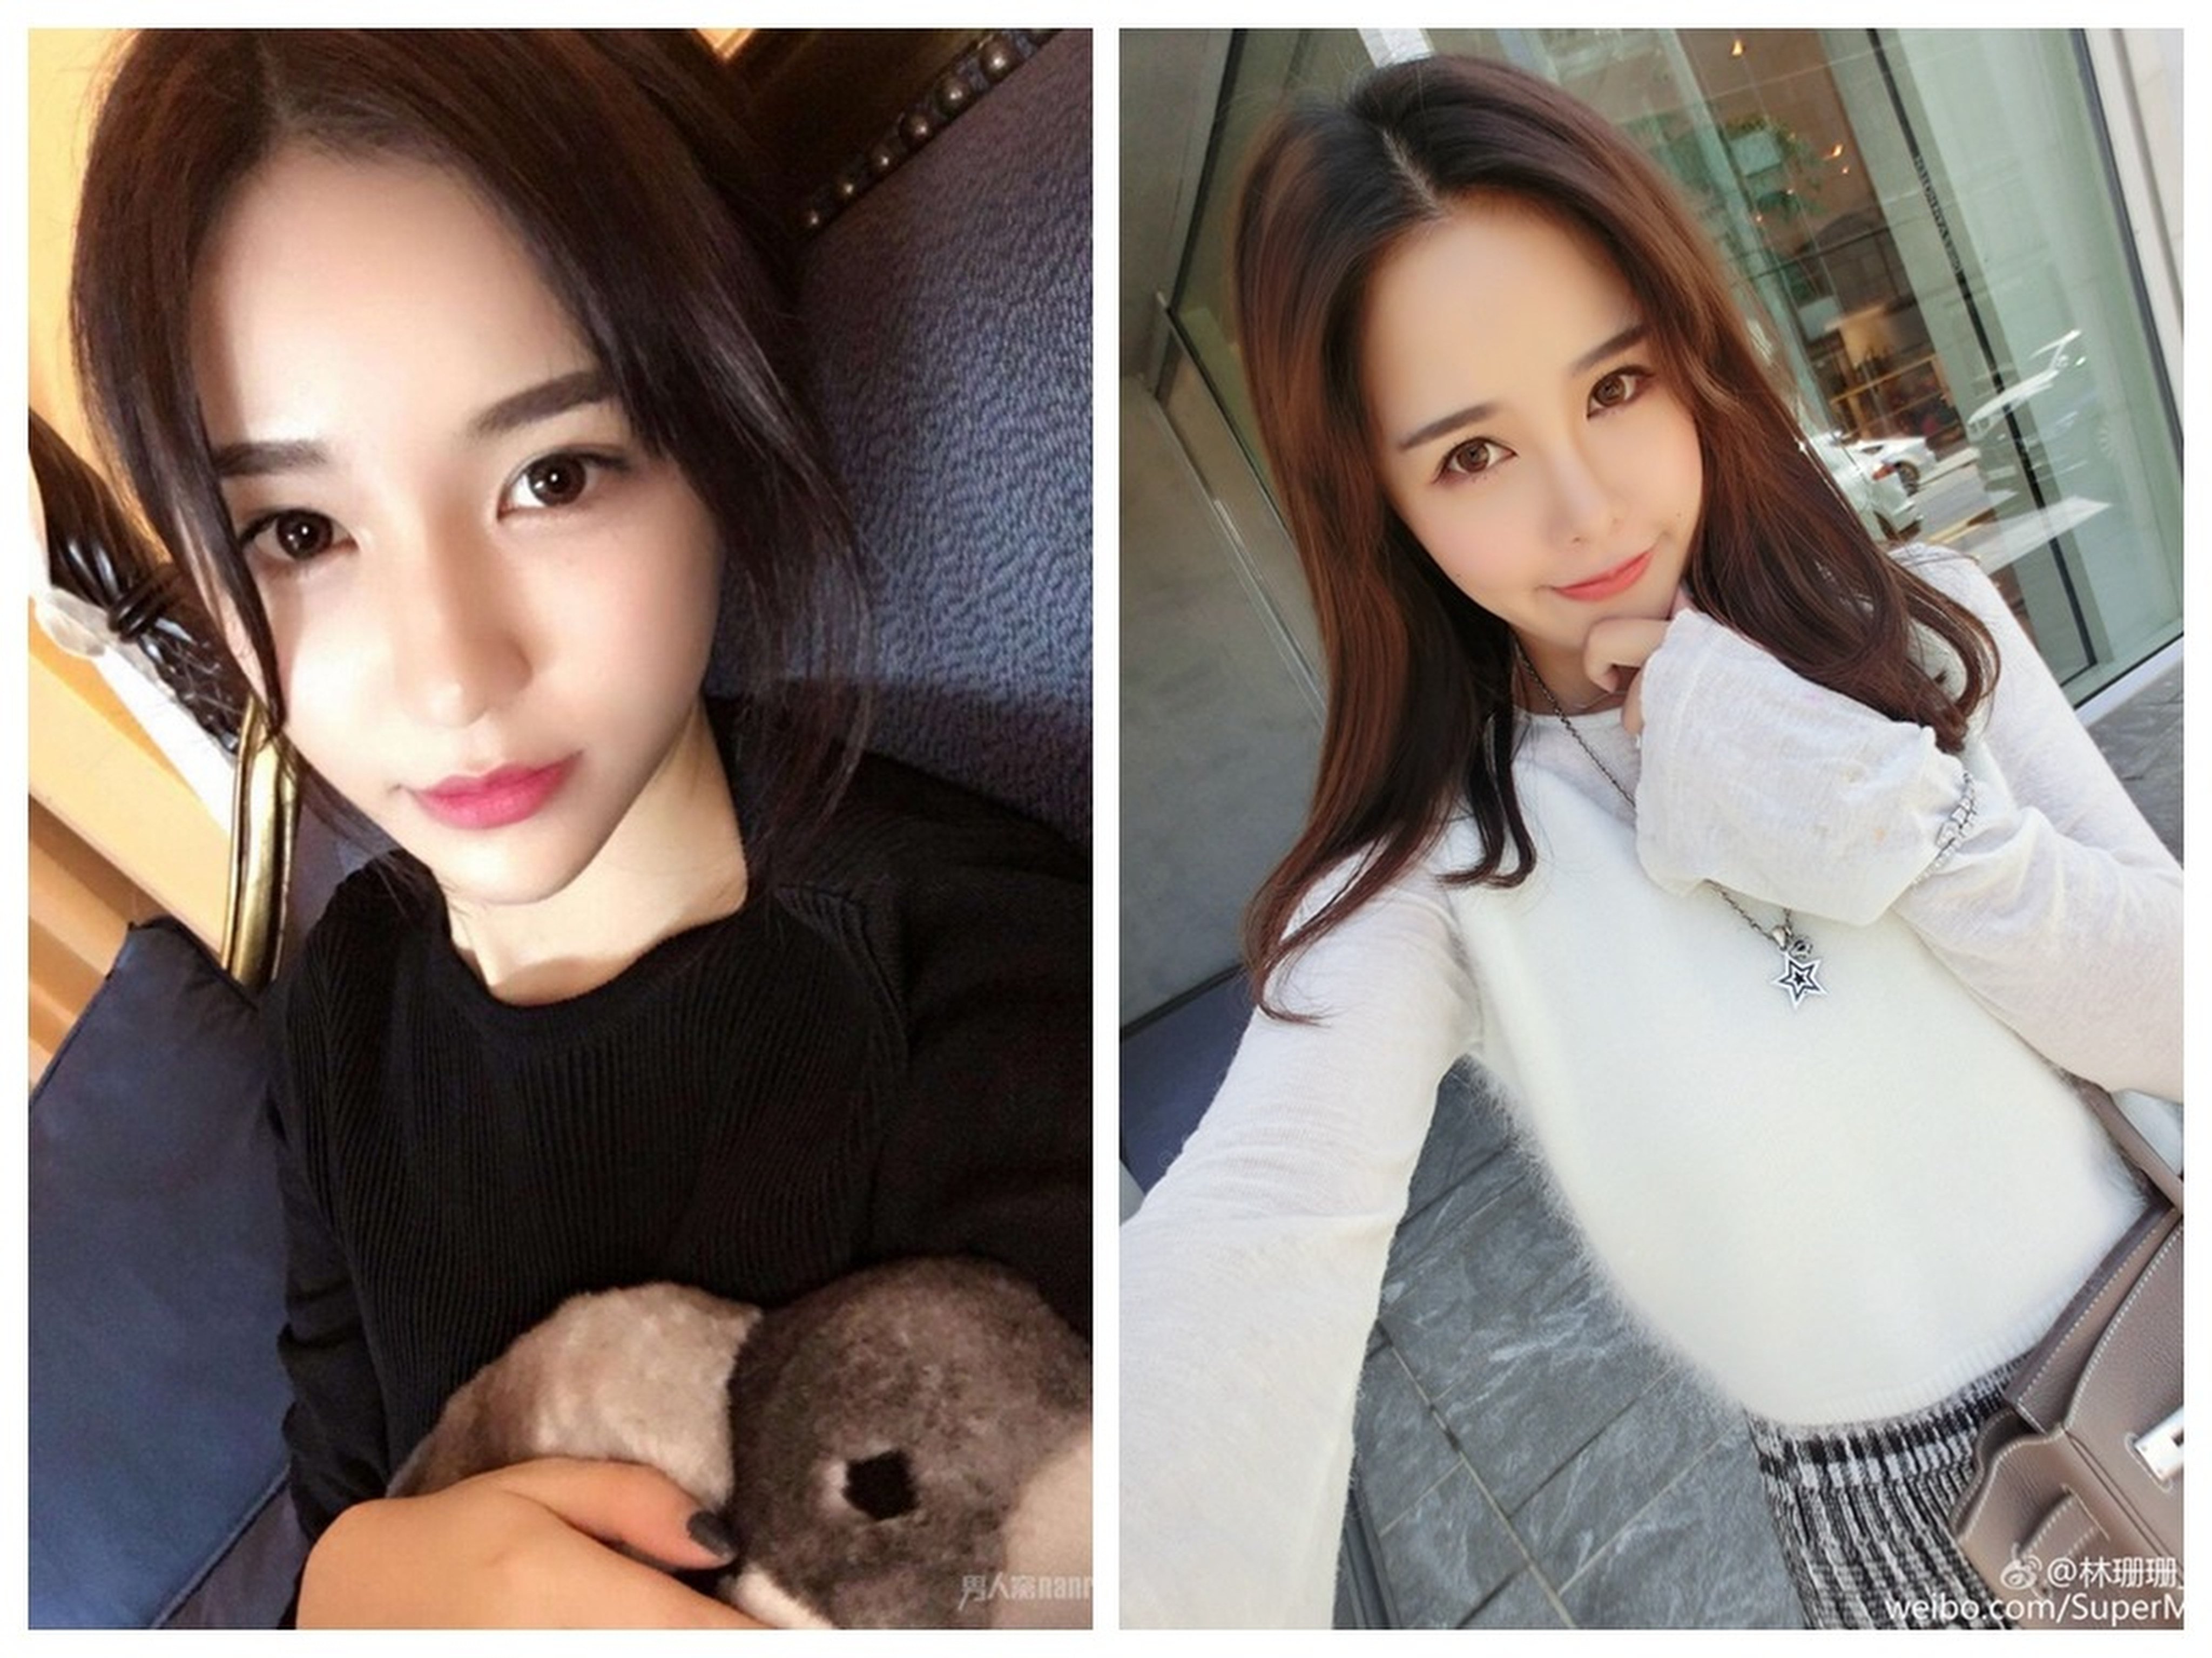 The online presence of Chinese live-streaming stars Zhu Chenhui, aka Xueli Cherie, and Lin Shanshan was erased in recent days after they were fined last month for tax evasion. Photo: Weibo